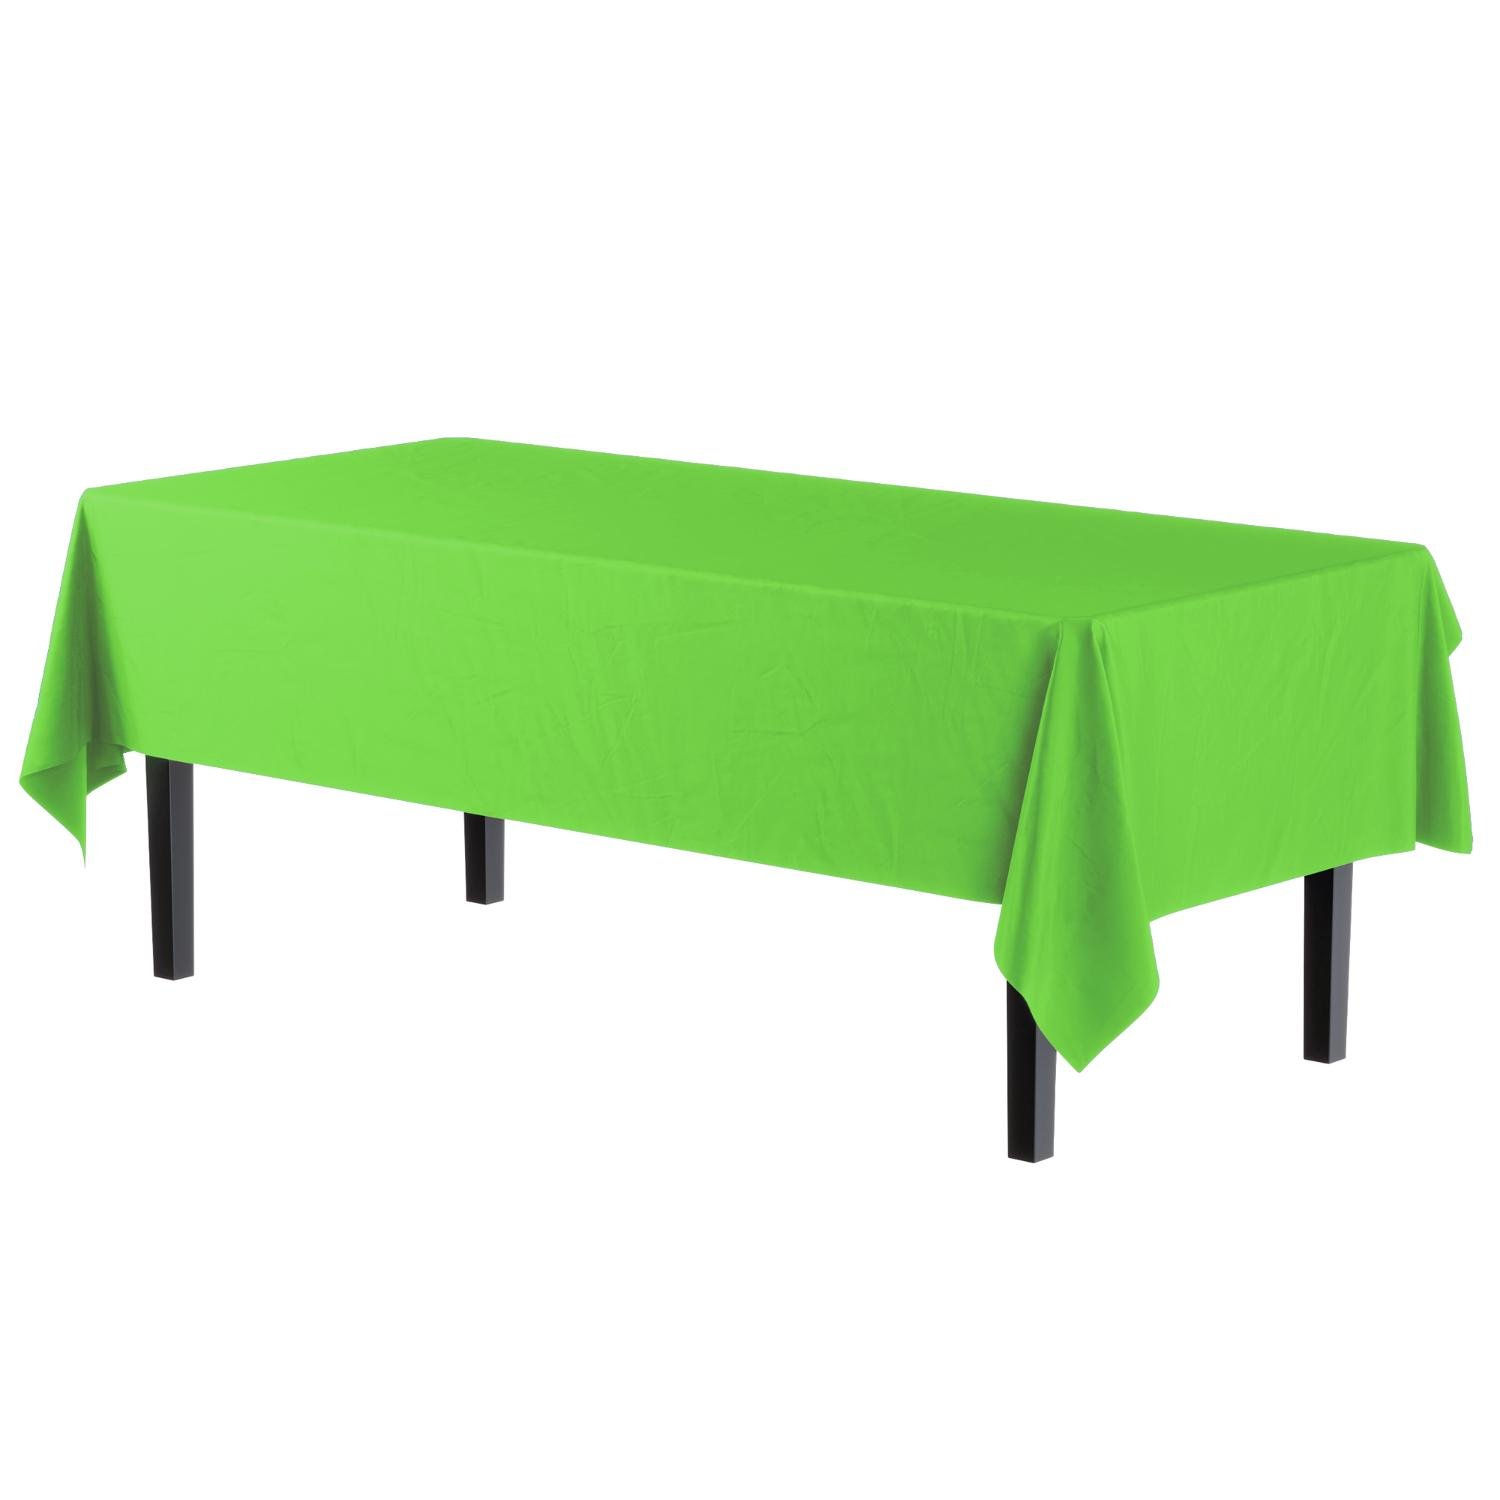 Premium Lime Green Table Cover - 96 Ct.